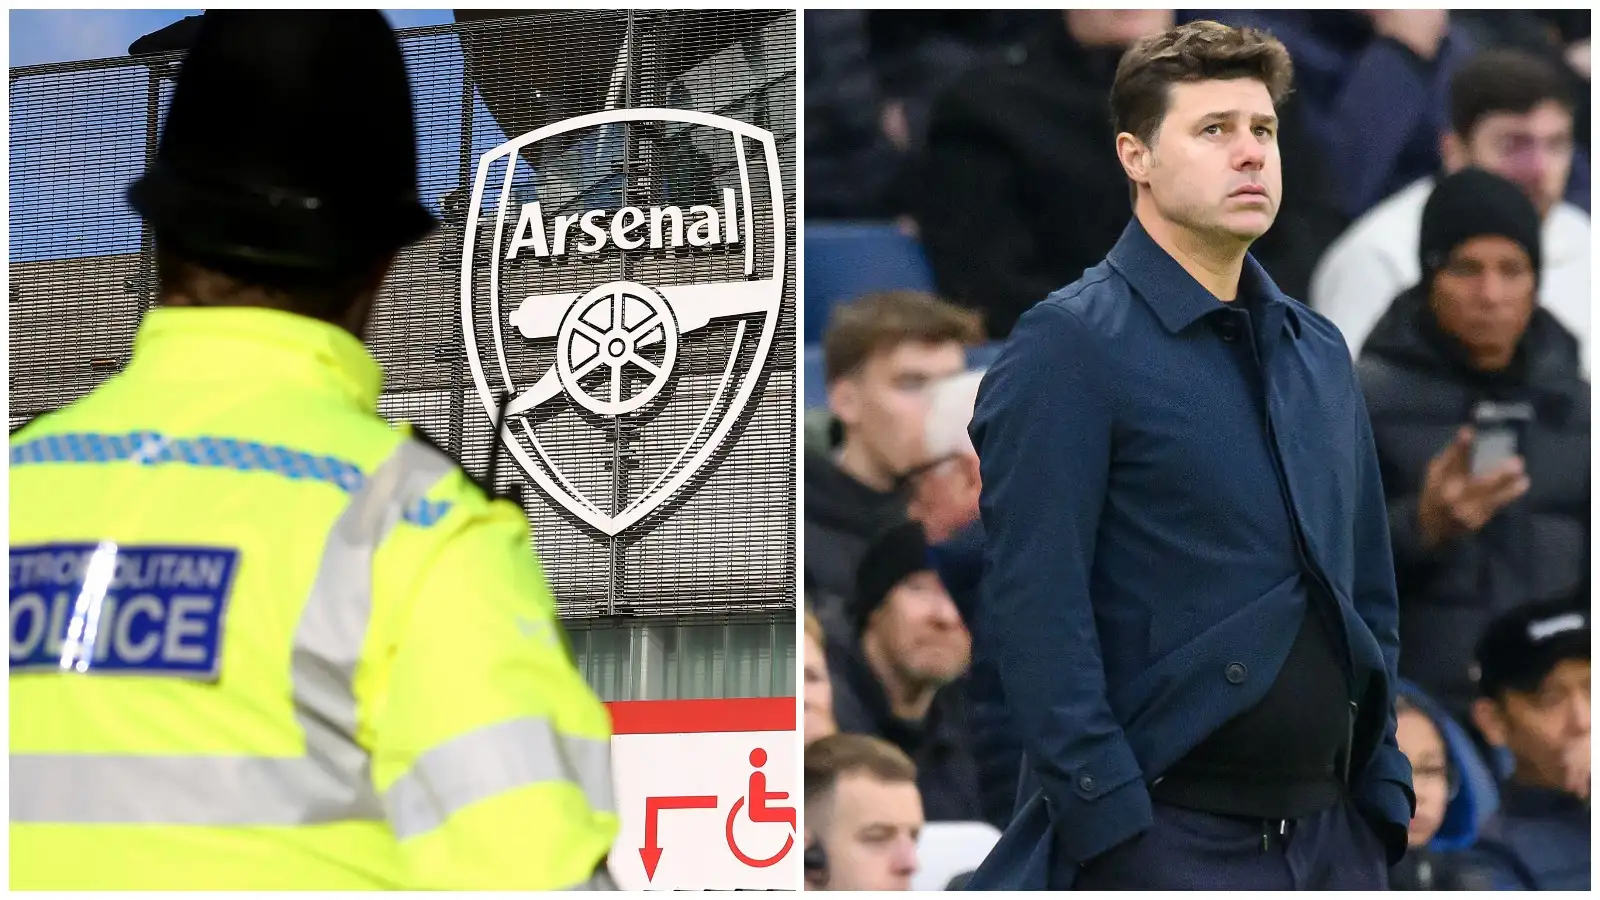 A cops director exterior the Emirates during and also Arsenal arcade, and also Mauricio Pochettino gawking dejected.